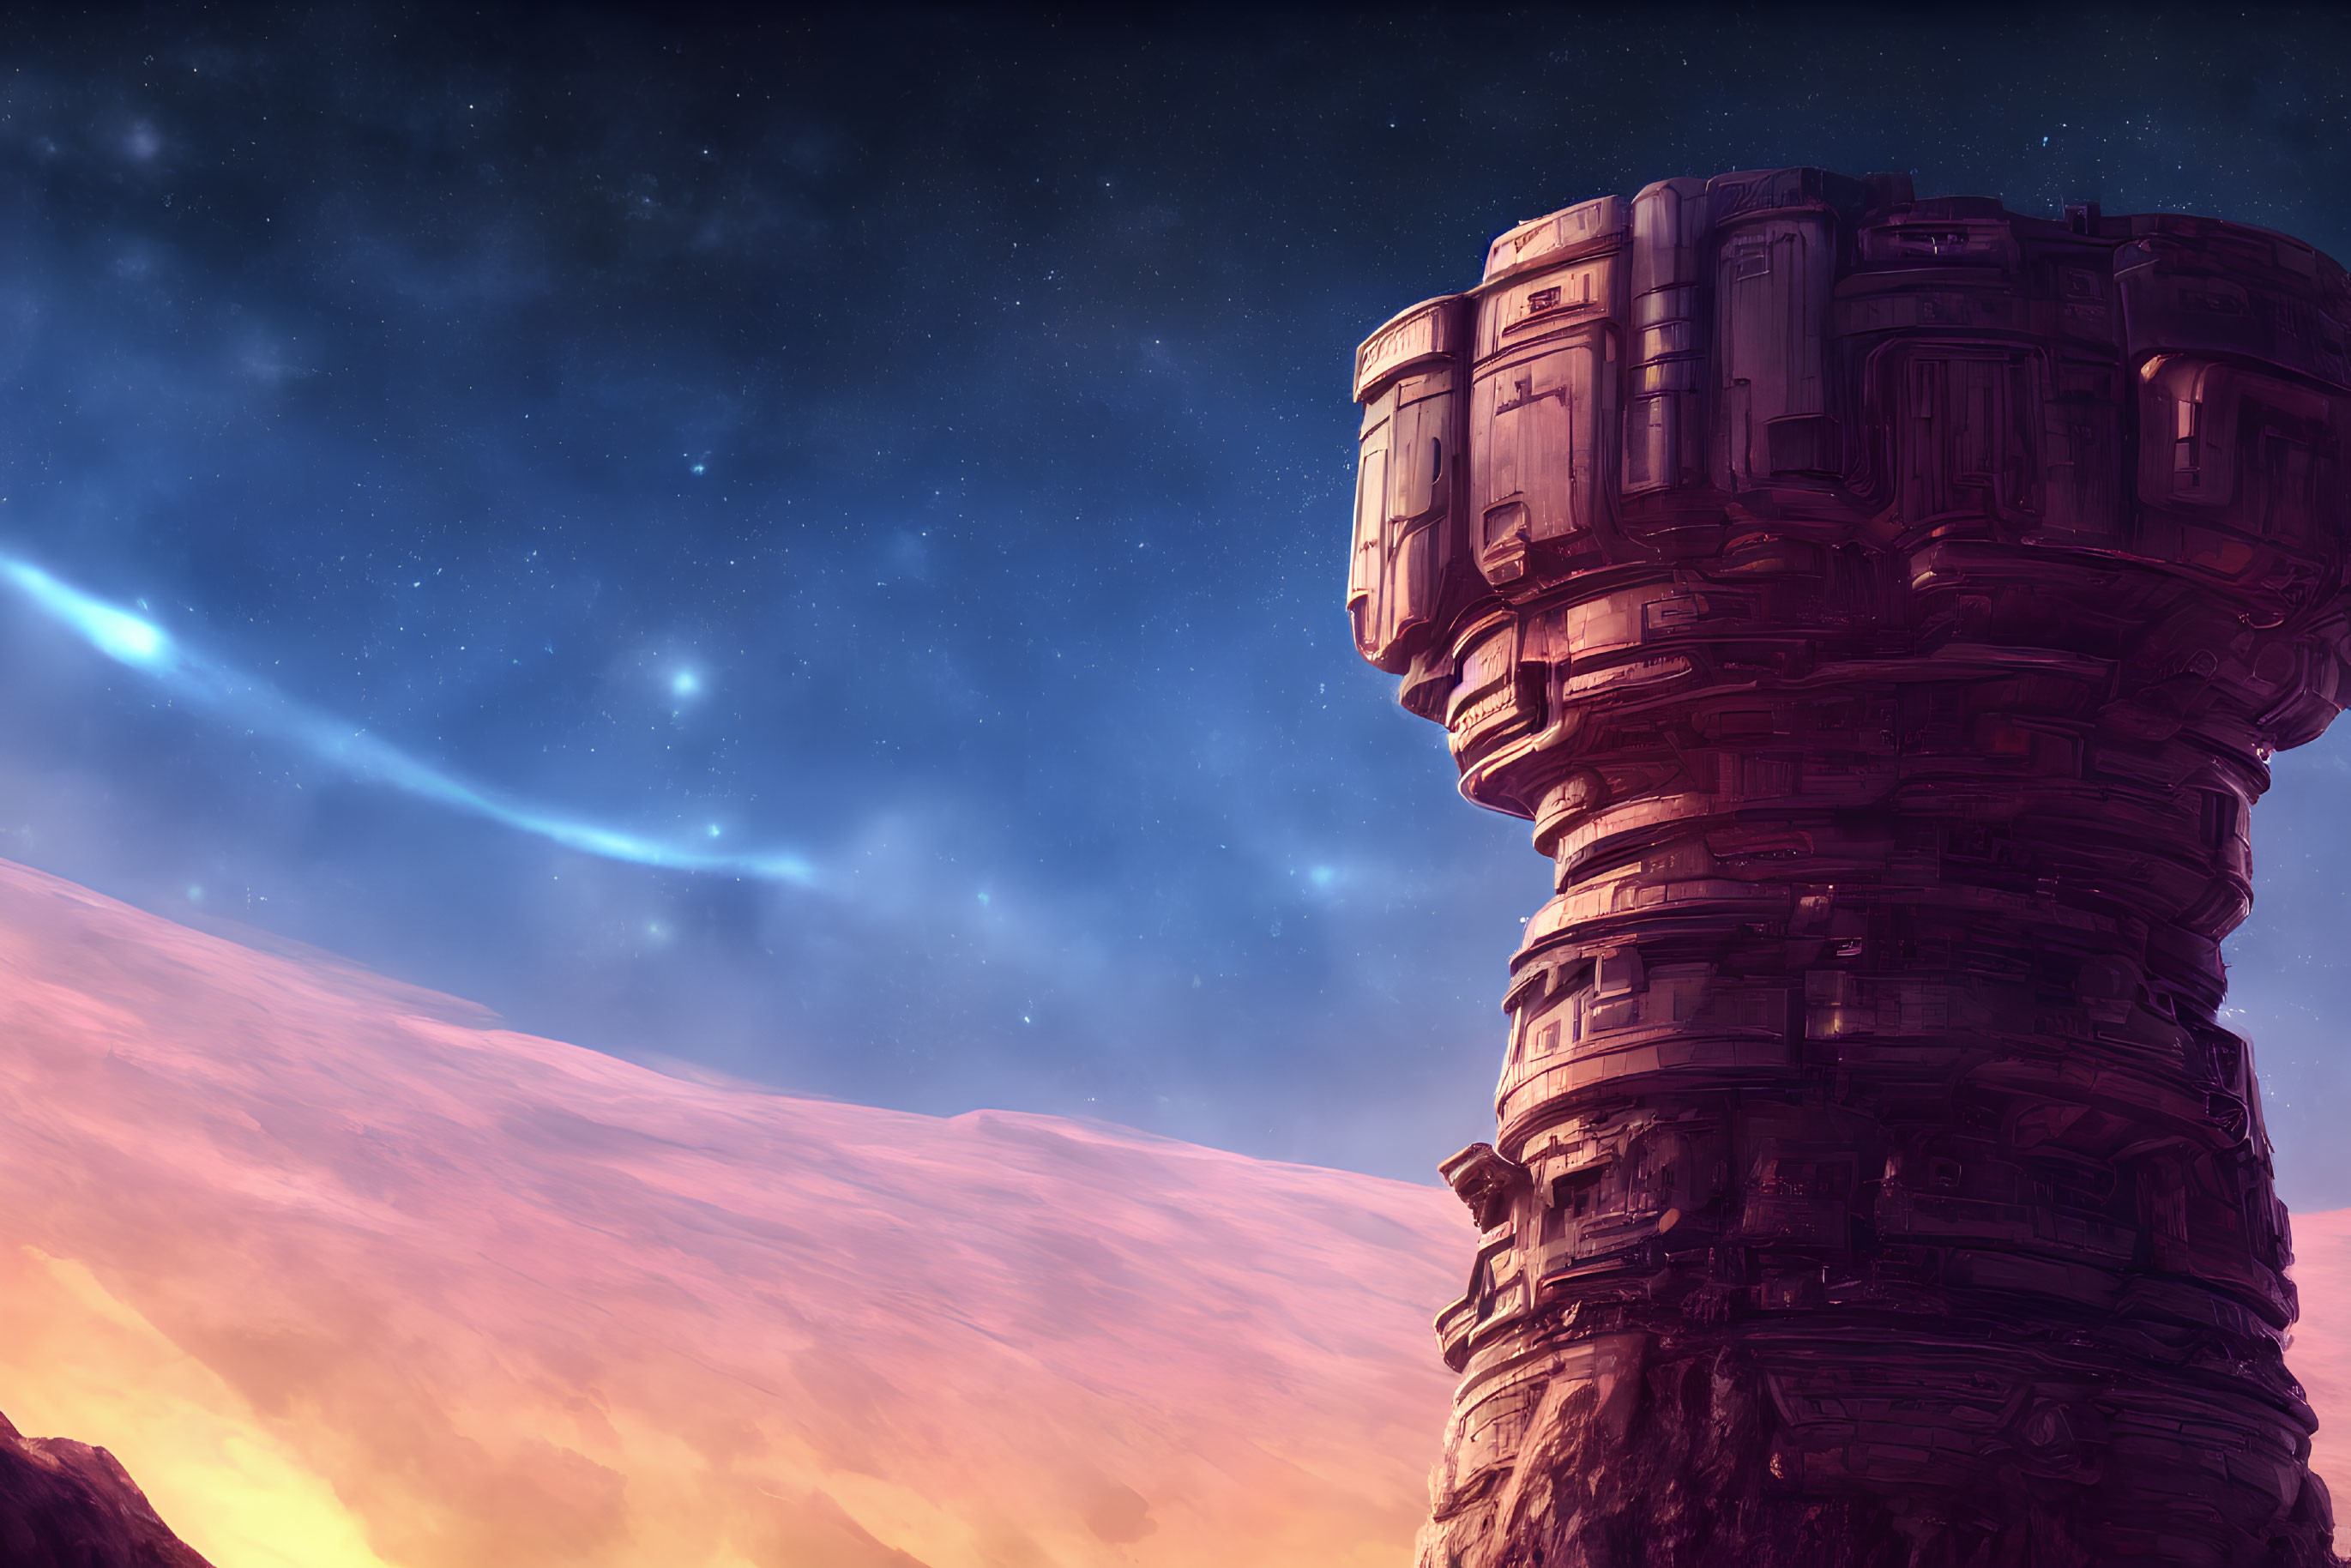 Futuristic alien planet scene with towering structure and comet in starry sky